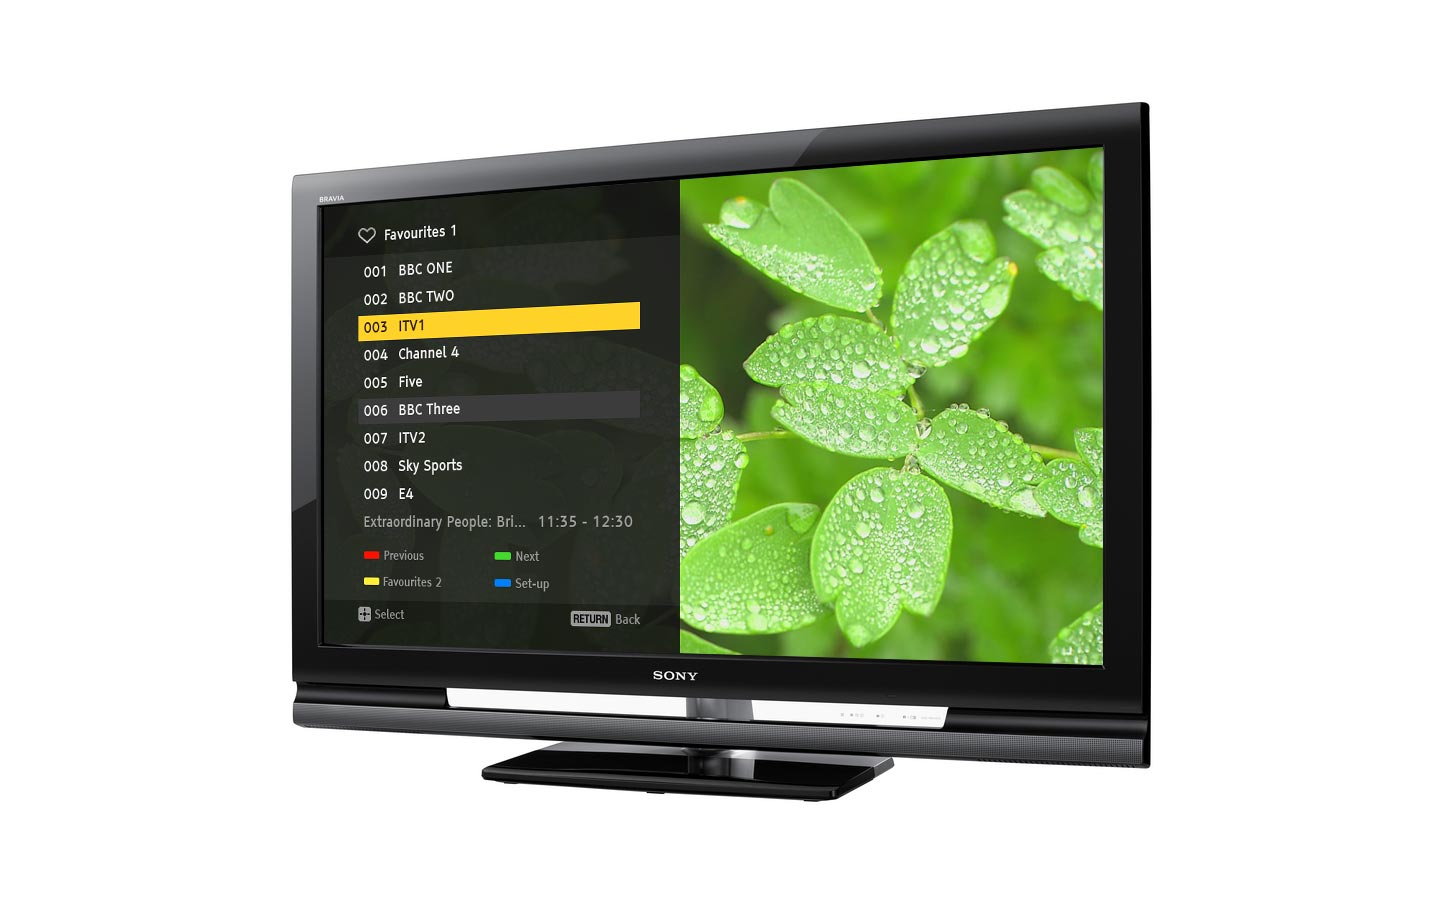 Sony BRAVIA 46-inch LCD TV displaying on-screen user interface